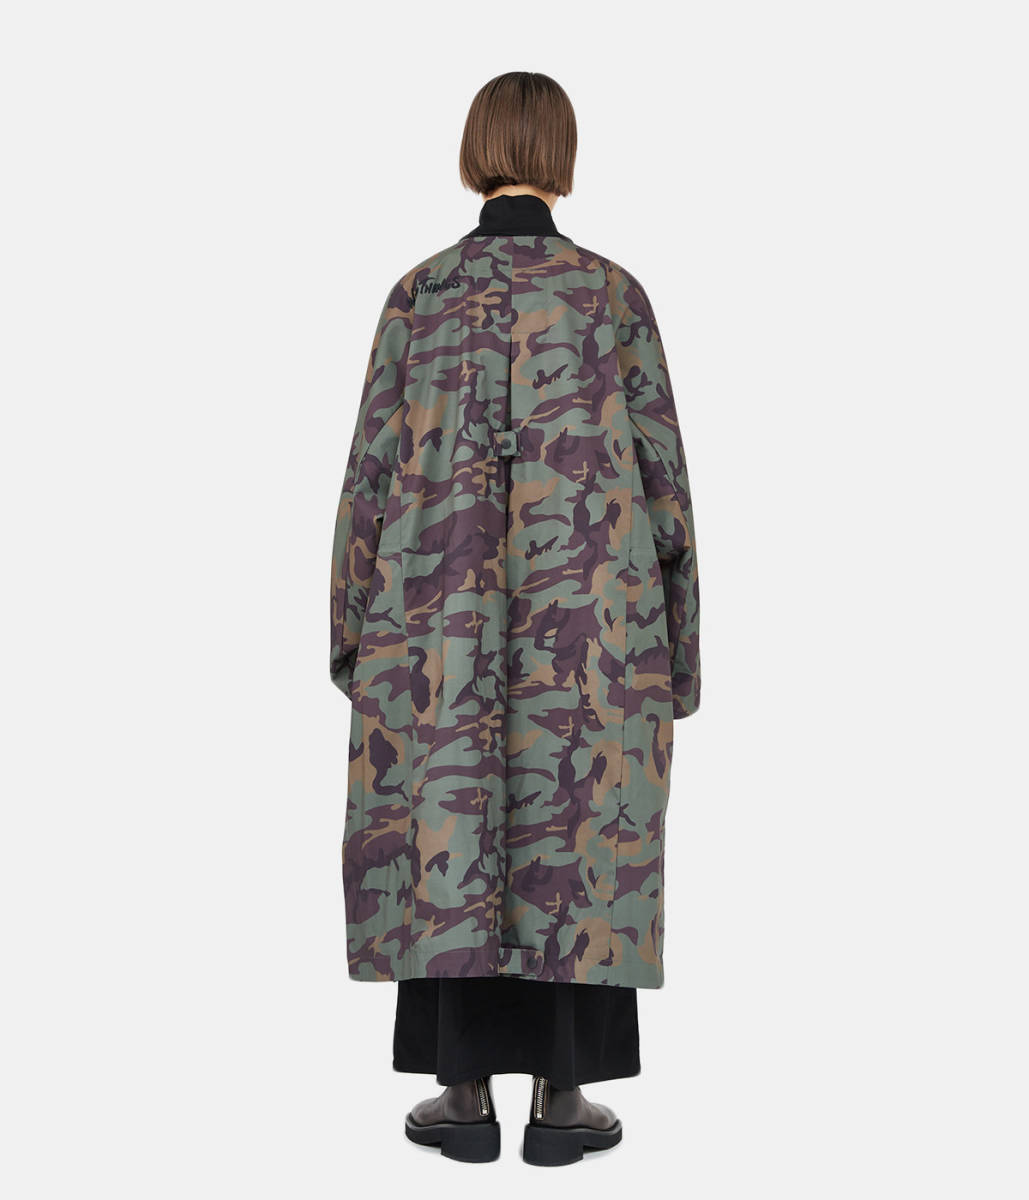  regular price 66000 jpy new goods WILD THINGS × JUN MIKAMI 22AW 1-WT collaboration camouflage shell coat WT22478ST-JM Jun mikami Wild Things 